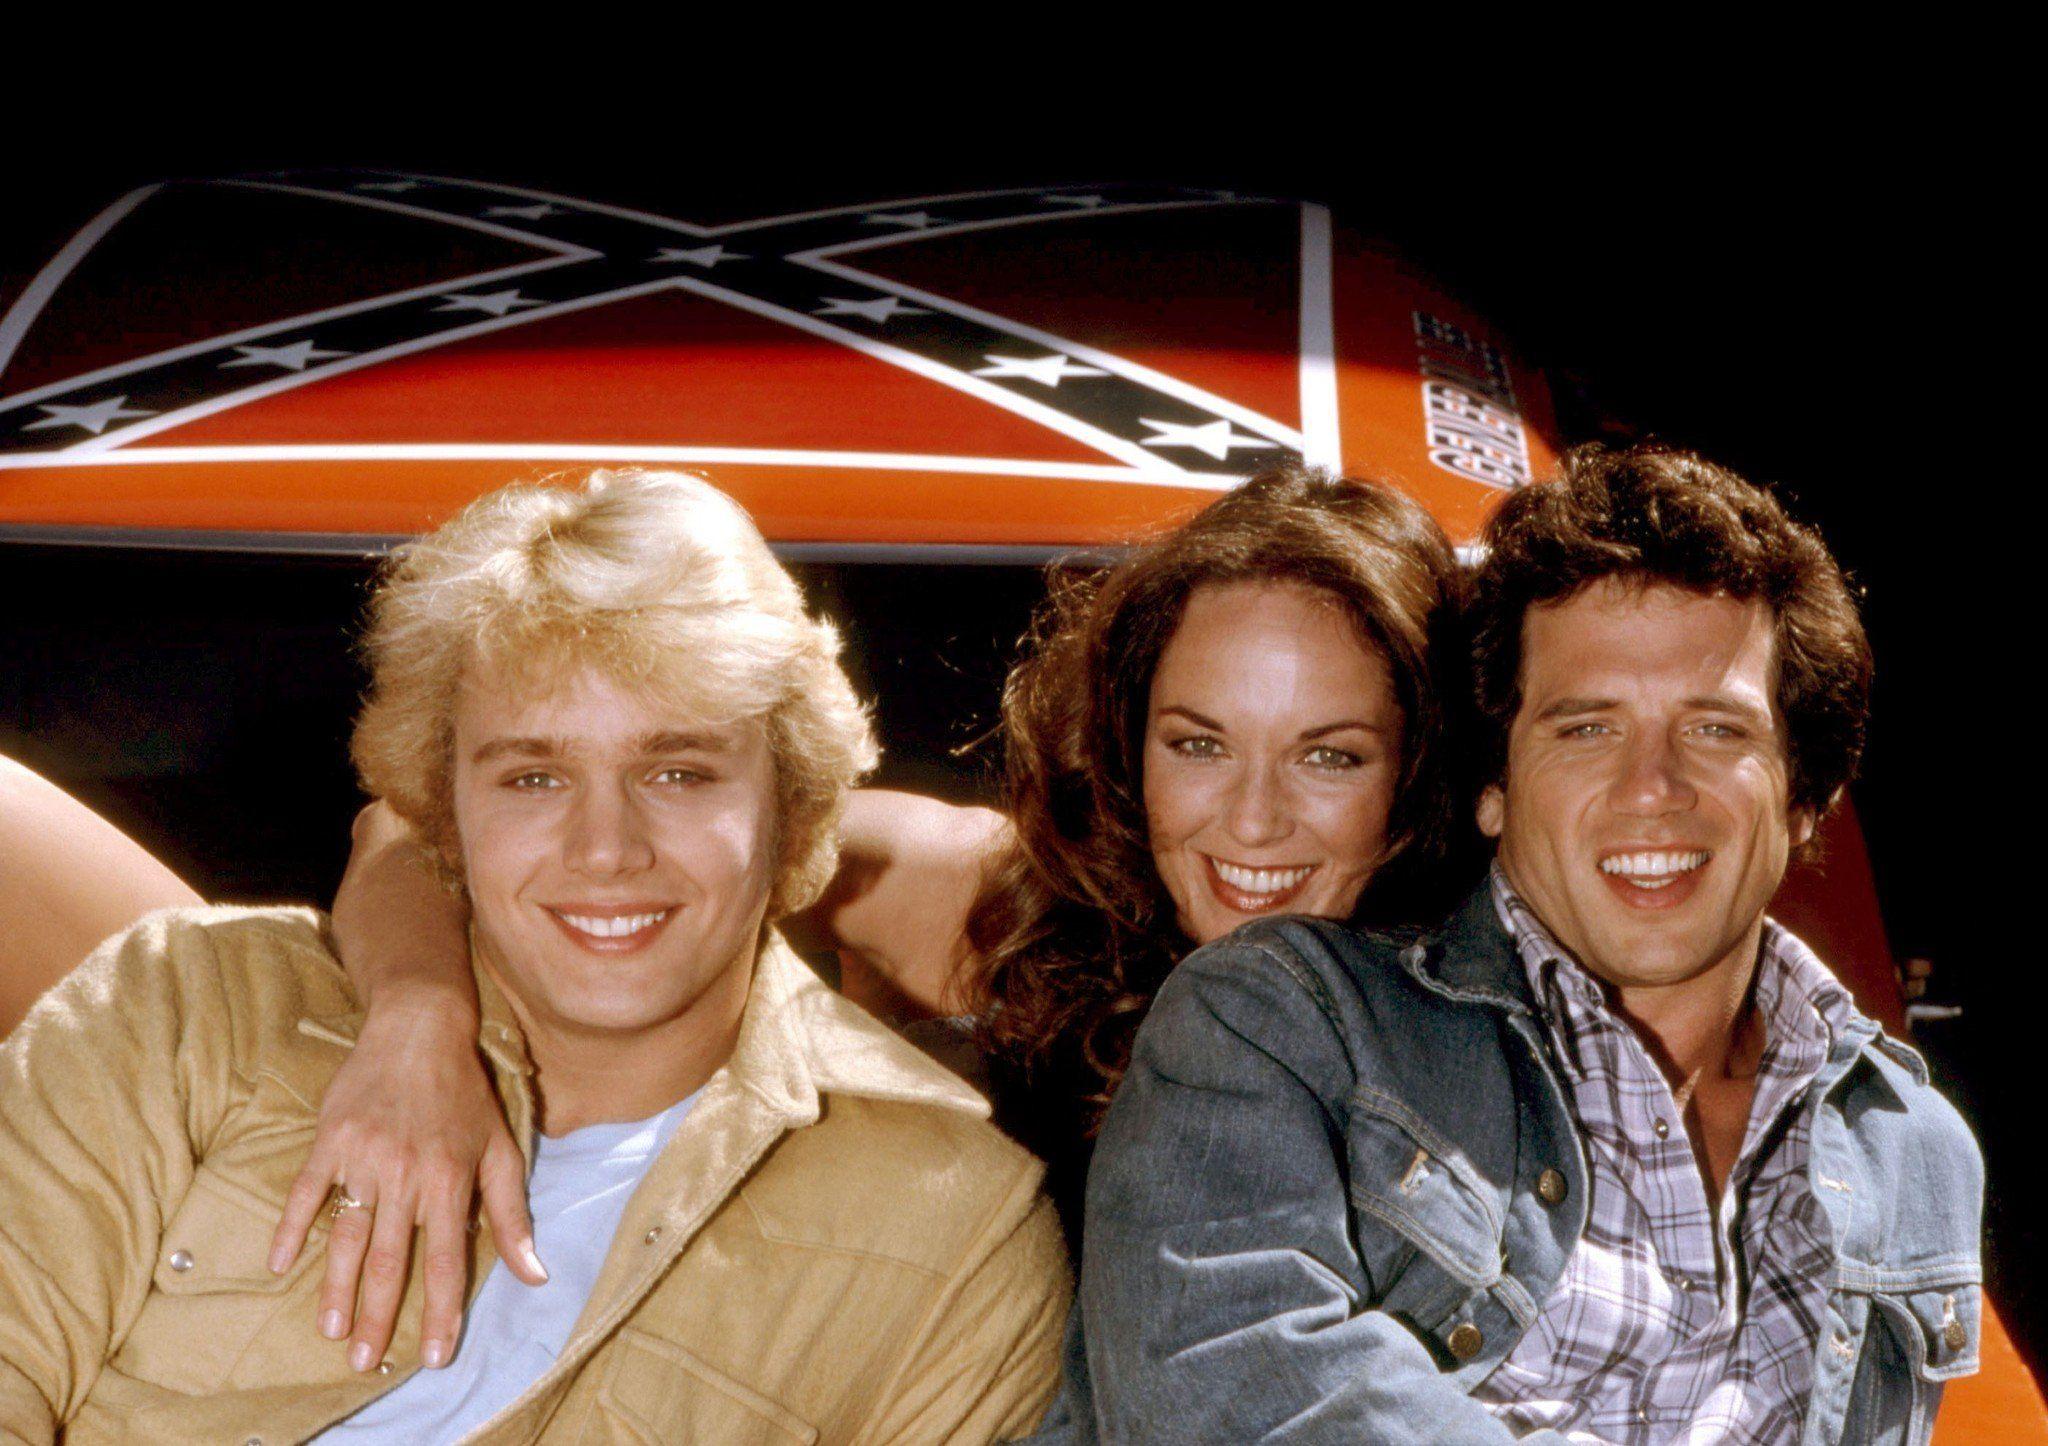 Dukes of Hazzard' actor John Schneider lashes out at TV Land